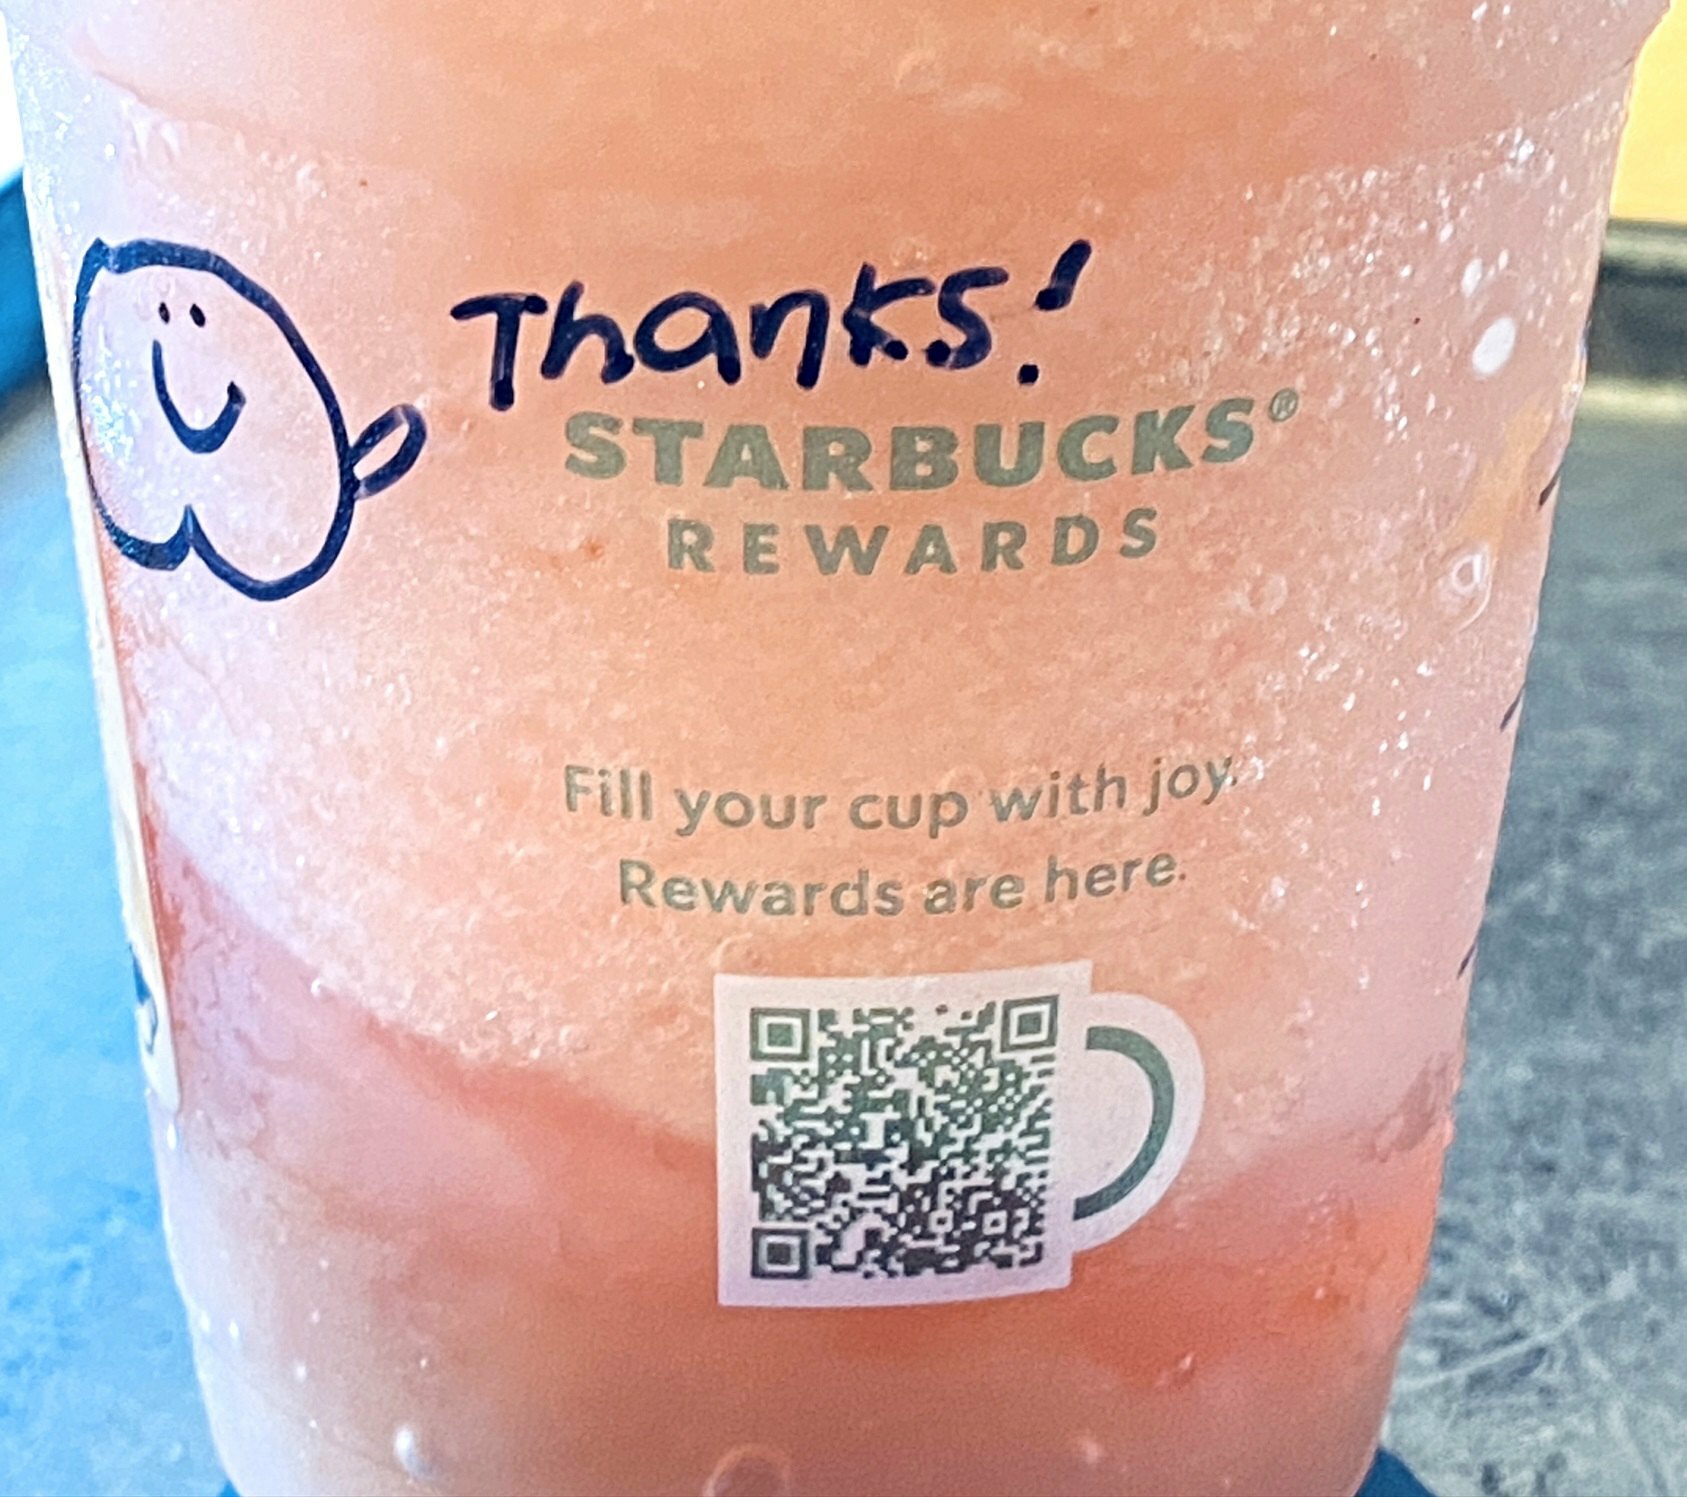 Thanks! Fill your cup with joy Rewards are here.